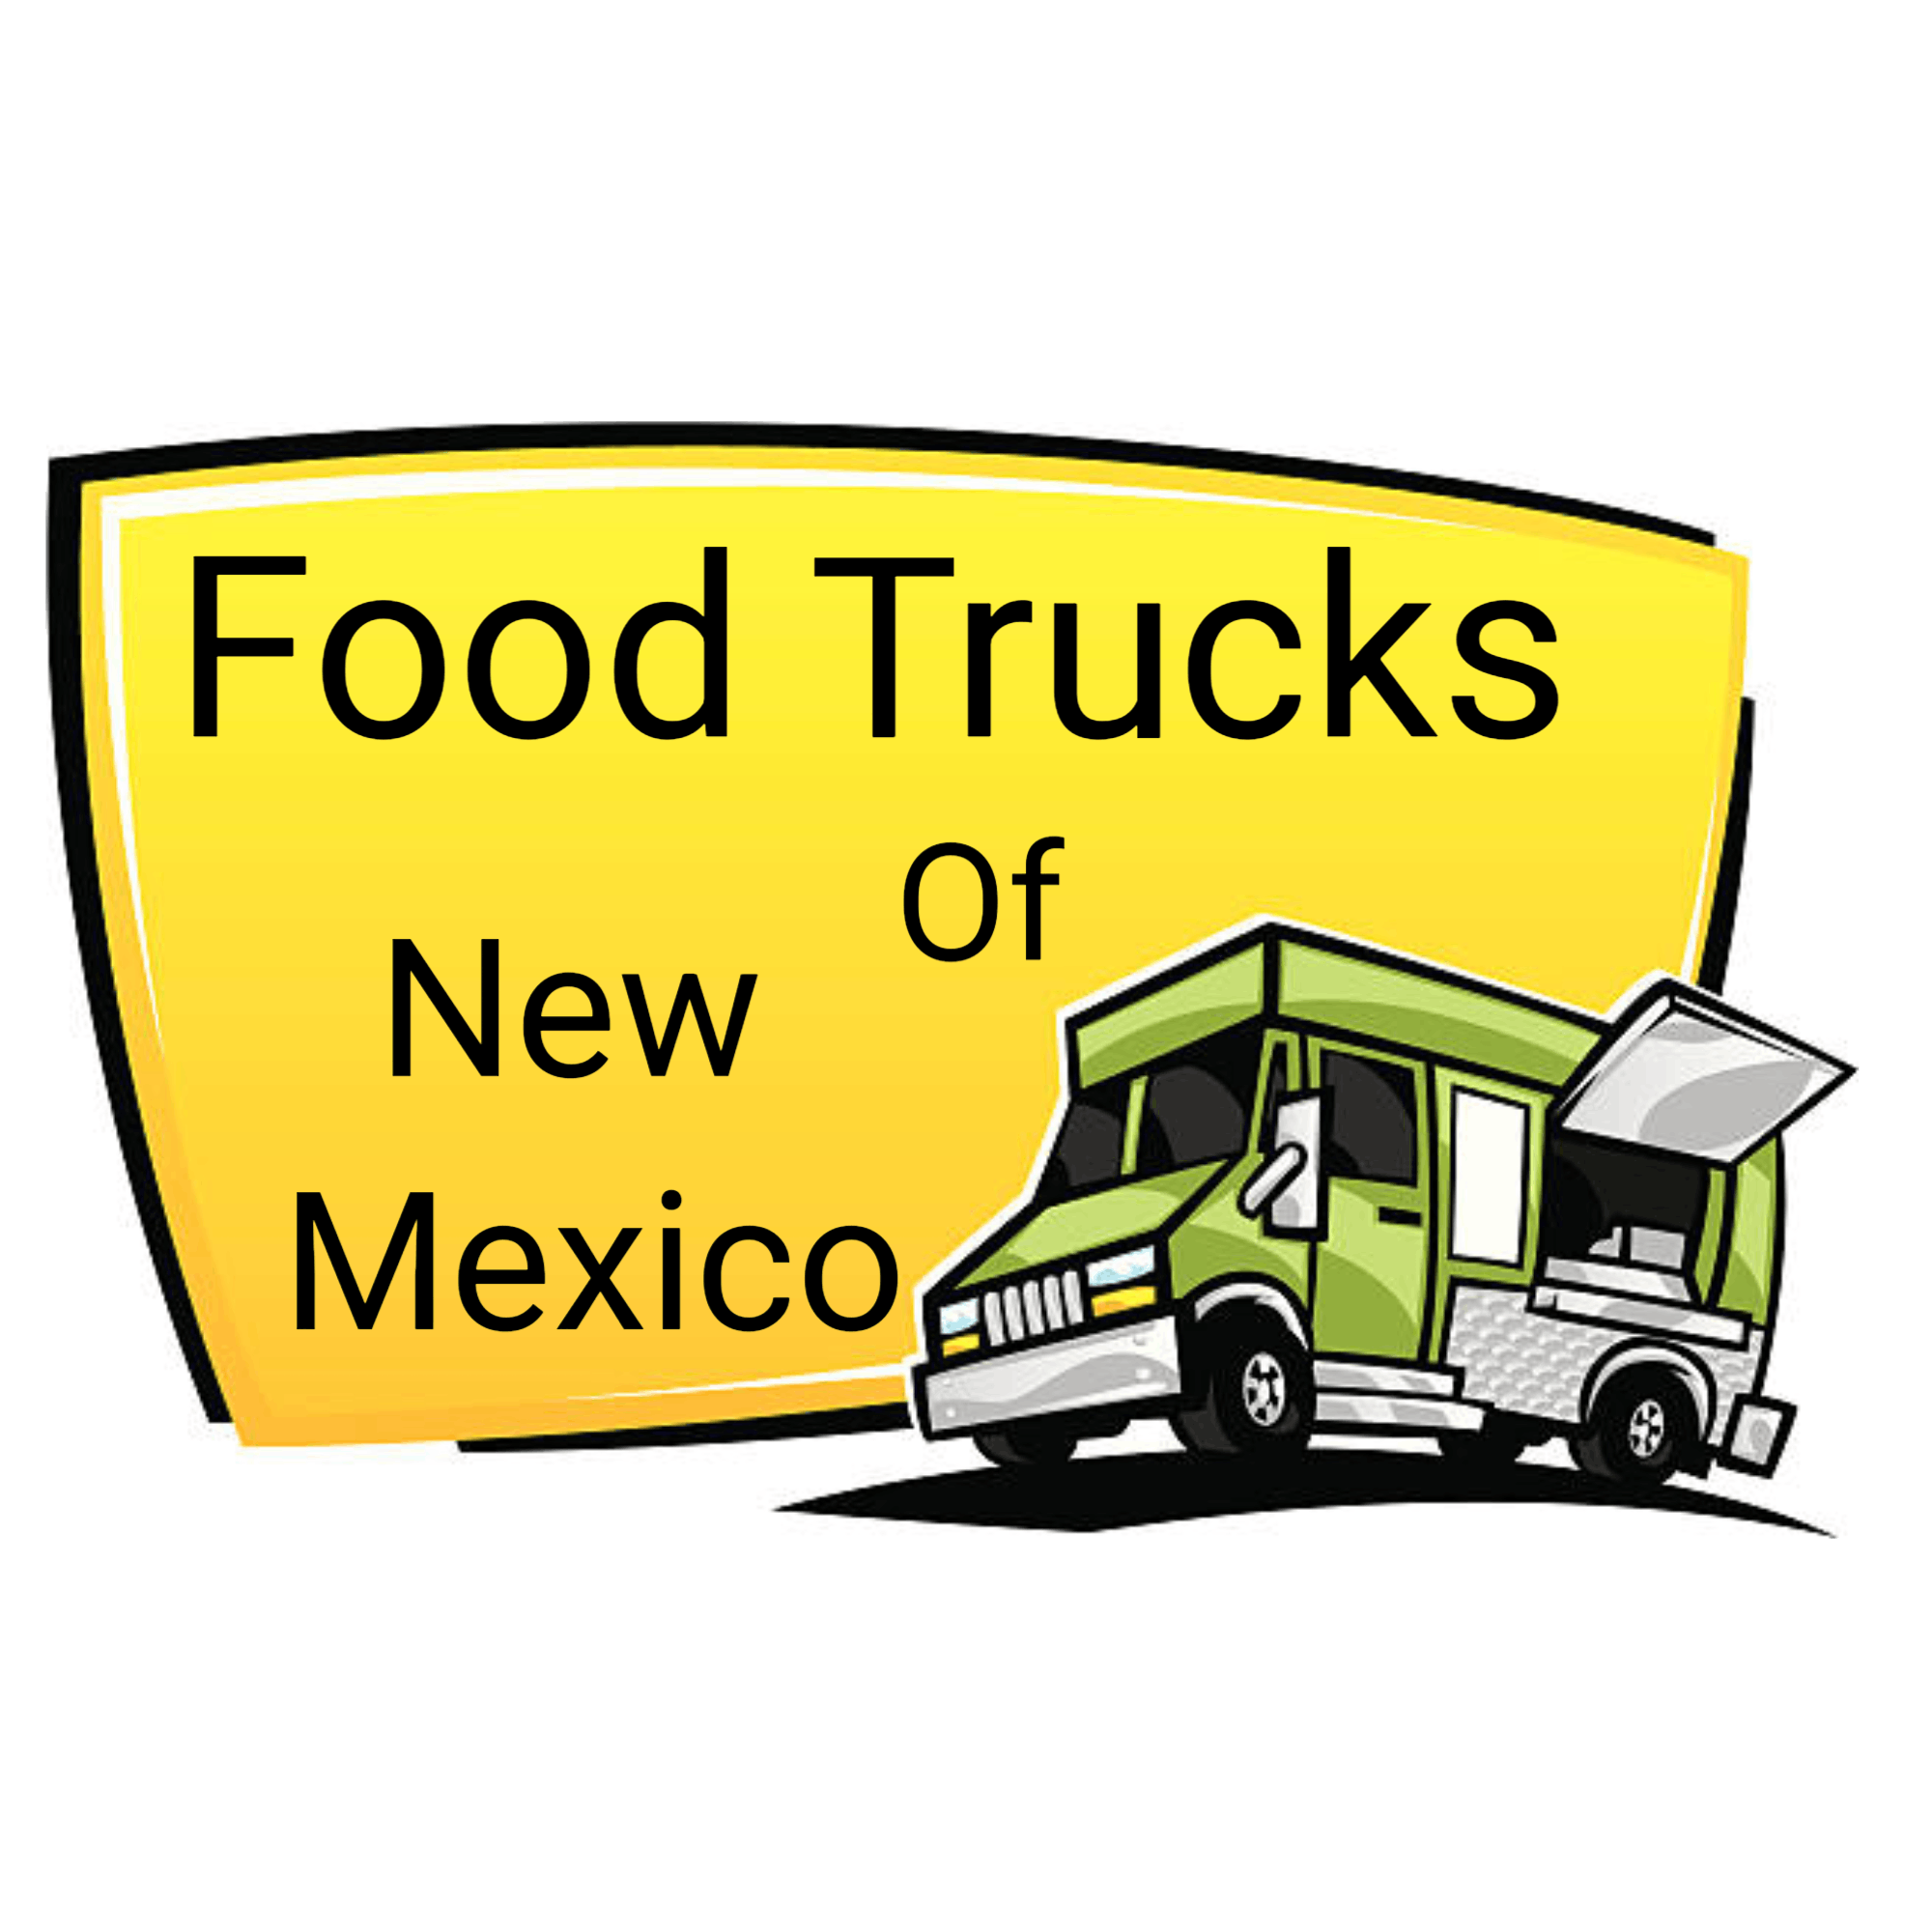 FOOD TRUCKS OF NEW MEXICO